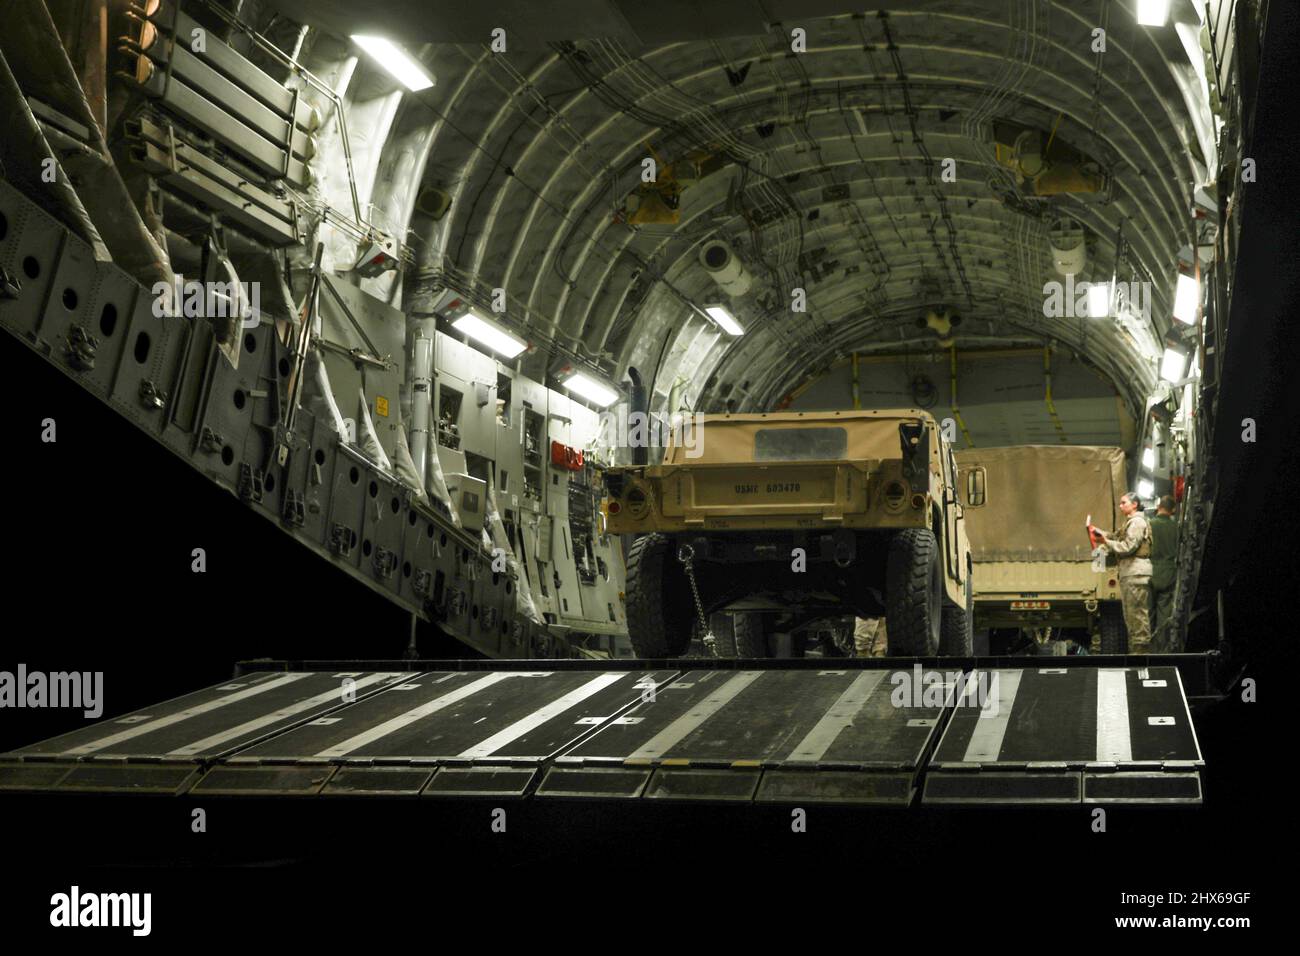 U.S. Marine Corps Humvees assigned to 7th Marine Regiment, 1st Marine Division, are staged in preparation for a flight on a C17 Globemaster III assigned to 21st Airlift Squadron, Travis Air Force Base, California, during a command post exercise at Fort Hunter Liggett, California, March 1, 2022. This evolution provided an opportunity for Marines to practice expedient setup of a regimental headquarters, enabling command and control from distributed locations. (U.S. Marine Corps photo by Sgt. Jailine L. AliceaSantiago) Stock Photo